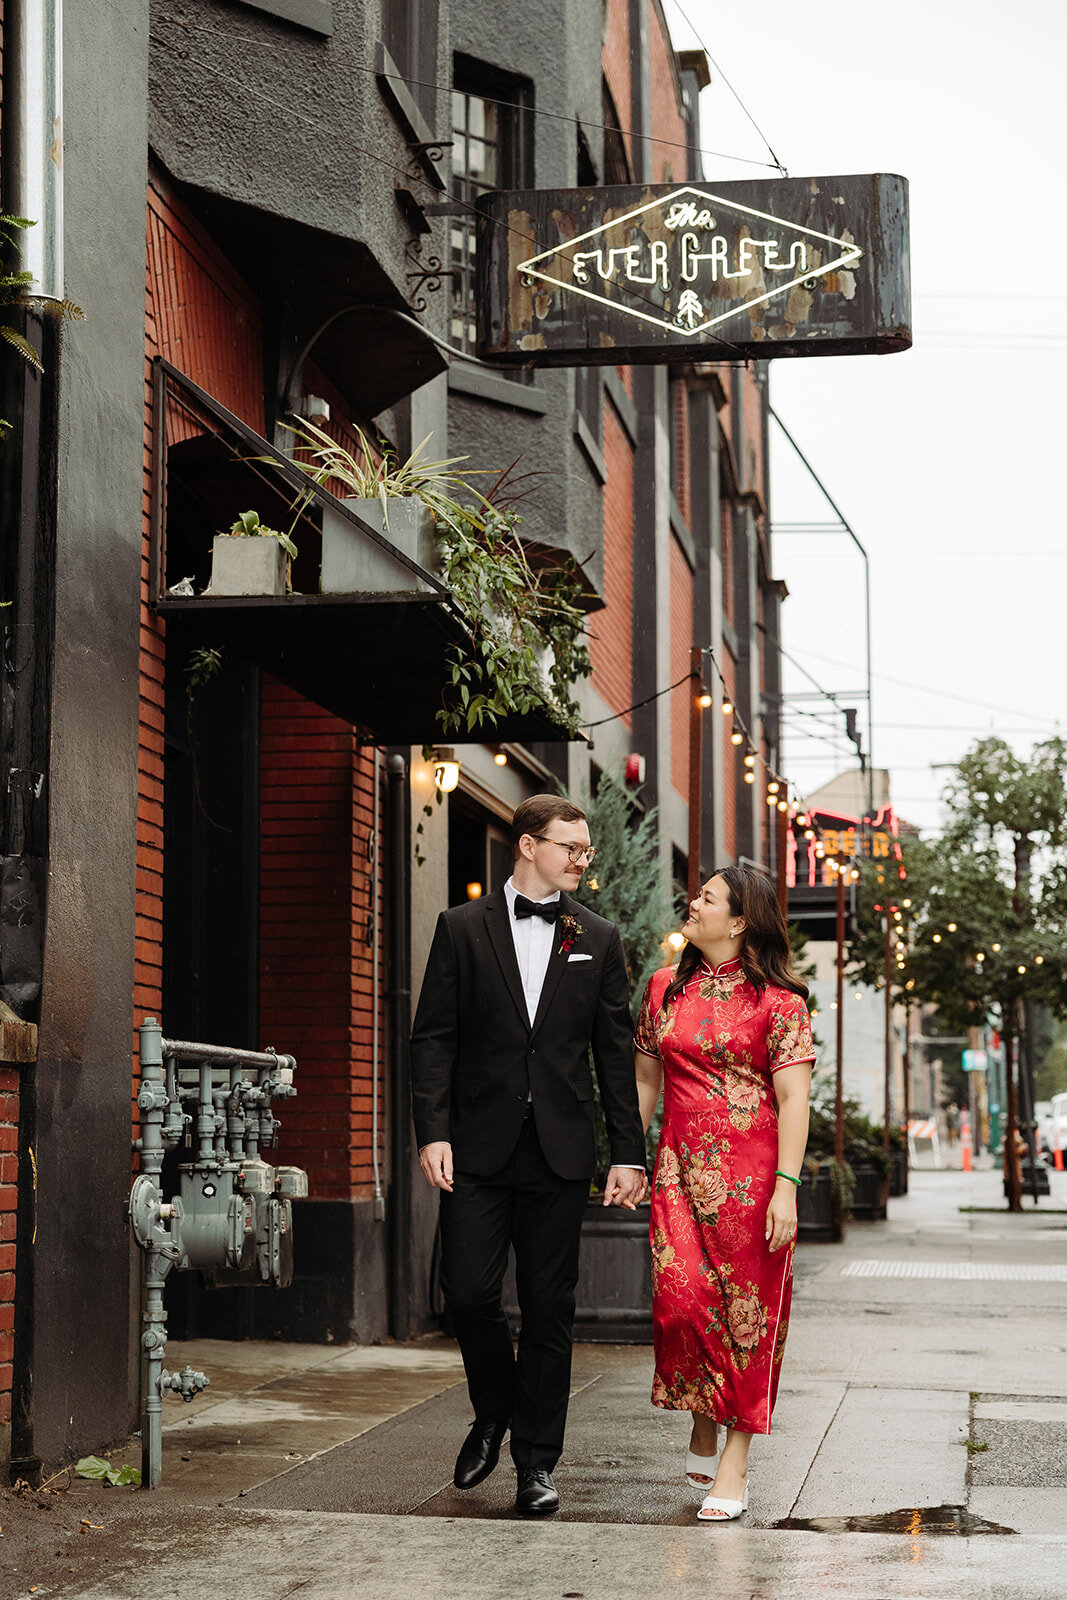 The Evergreen Chinese wedding outfit and portrait